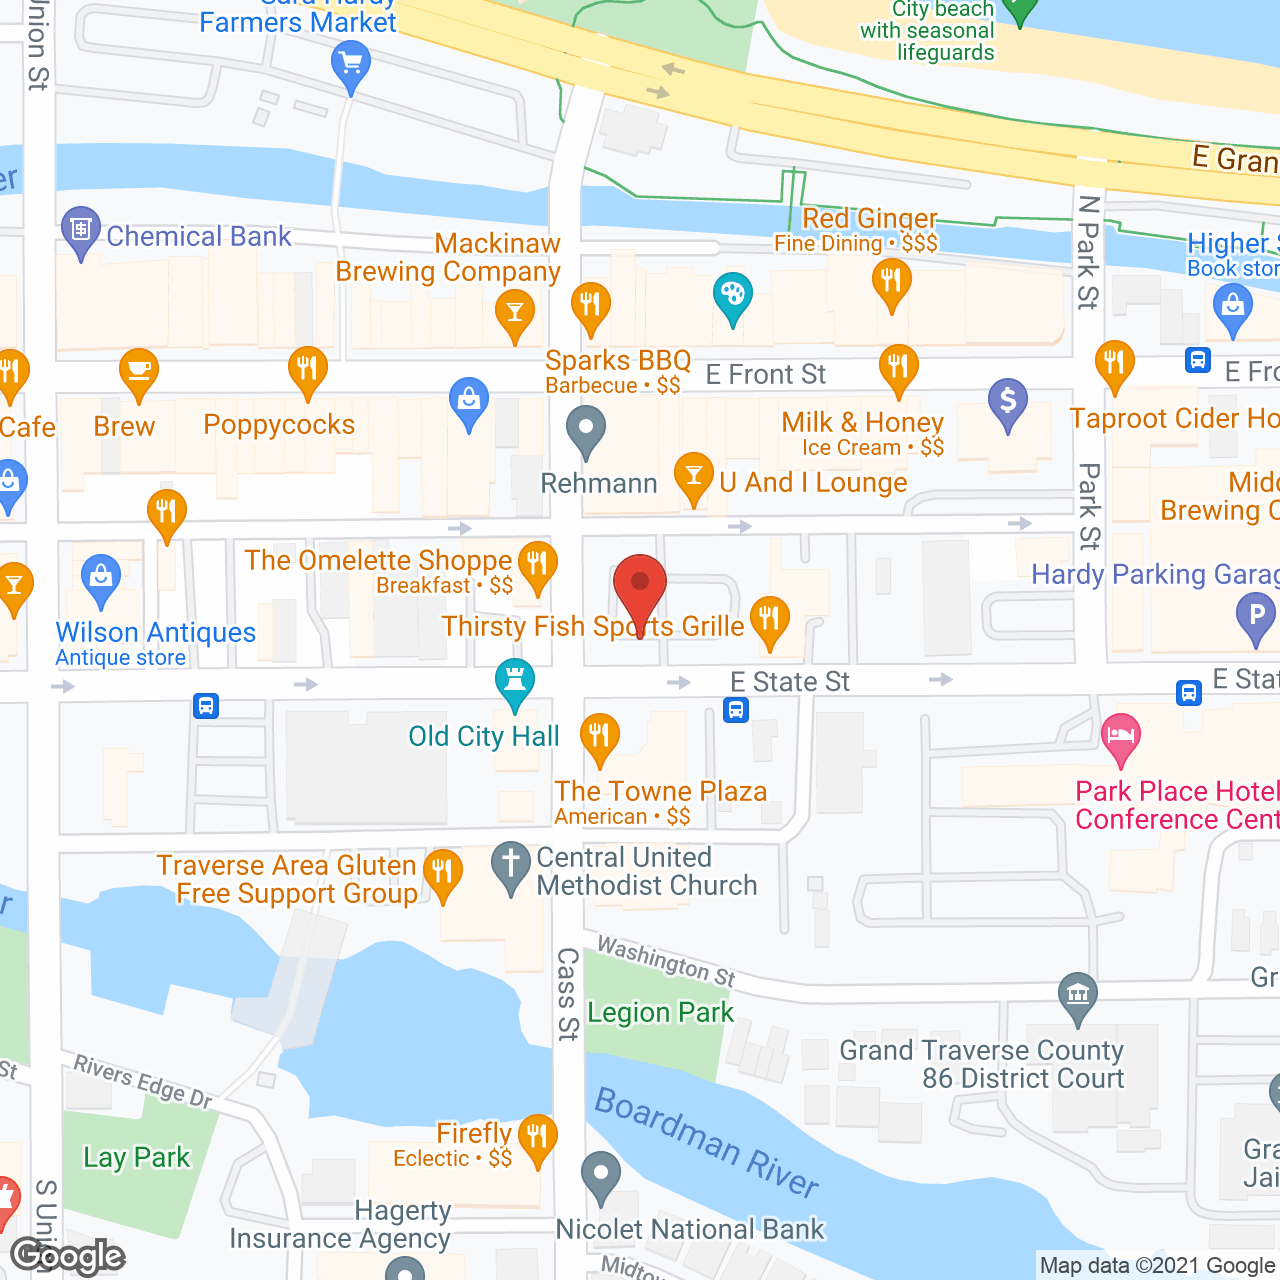 Grand Traverse Pavilions in google map